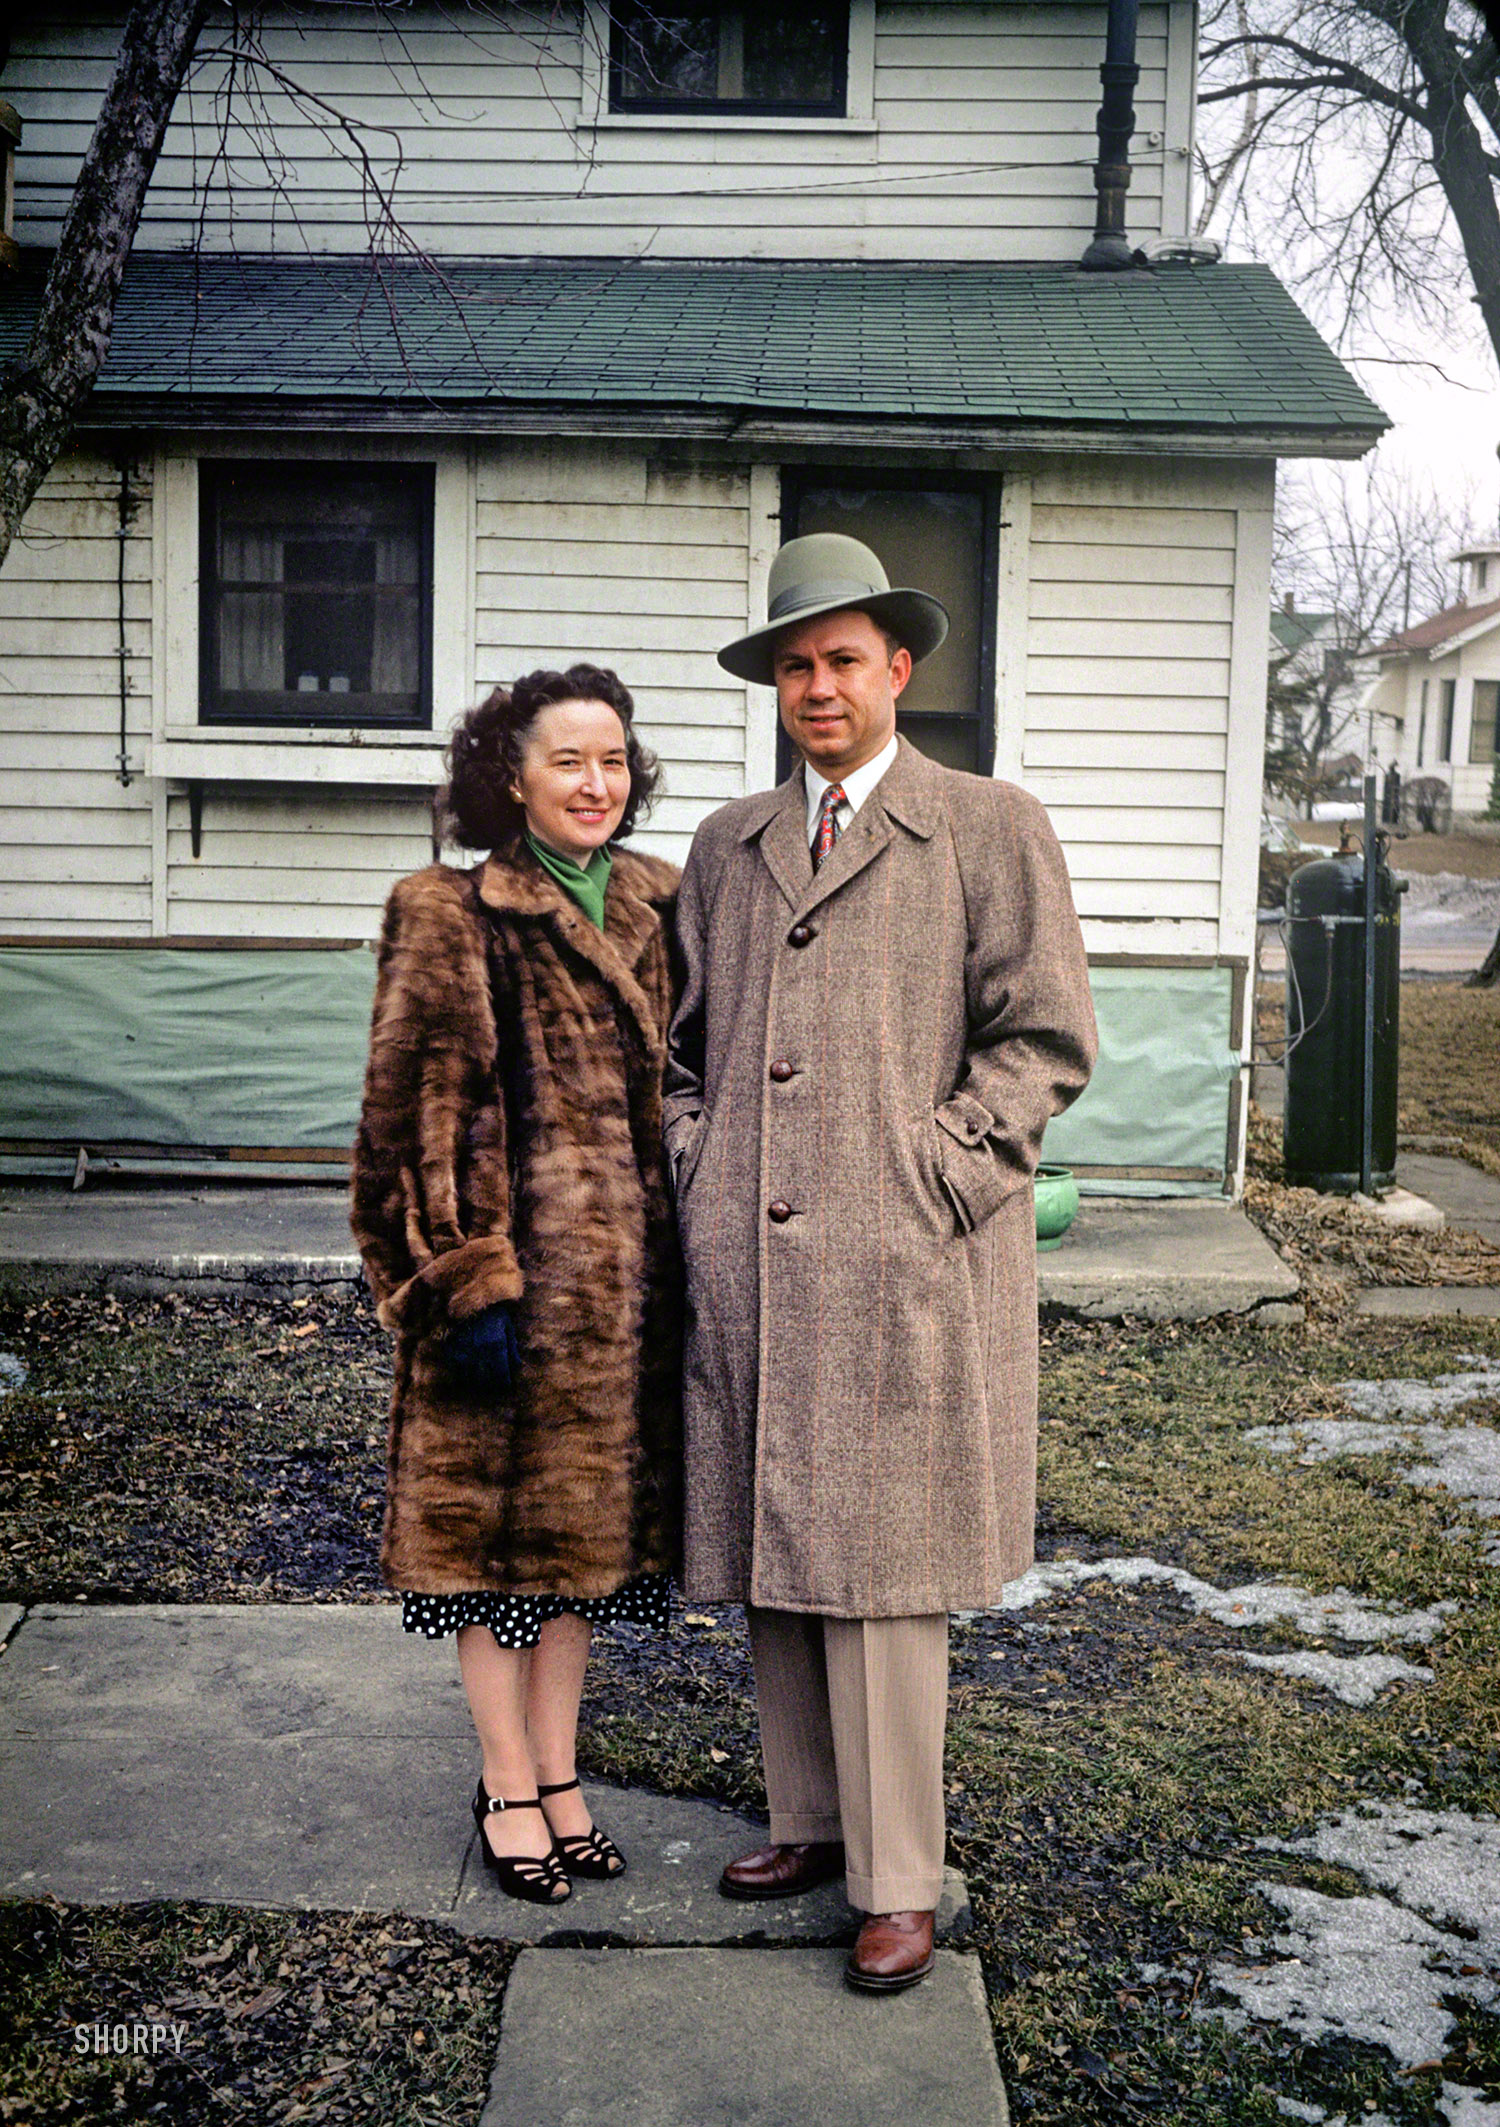 "Grace & Hubert -- 17 Feb 1952." In this latest episode of Minnesota Kodachromes, Grace's smile lights up a gray winter day. View full size.